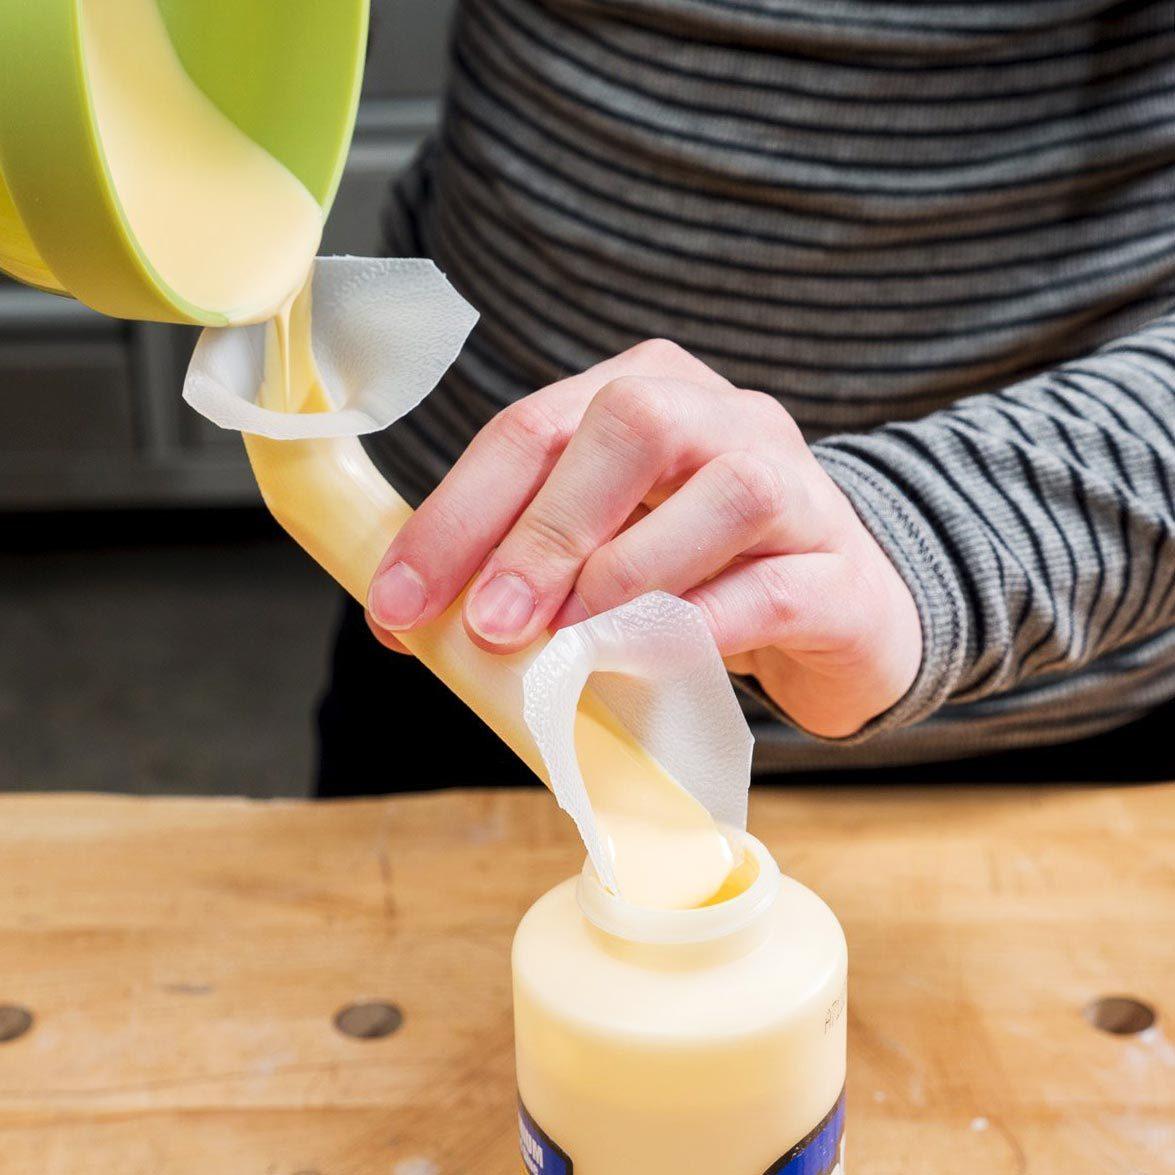 10 Resourceful Uses for Milk Jugs